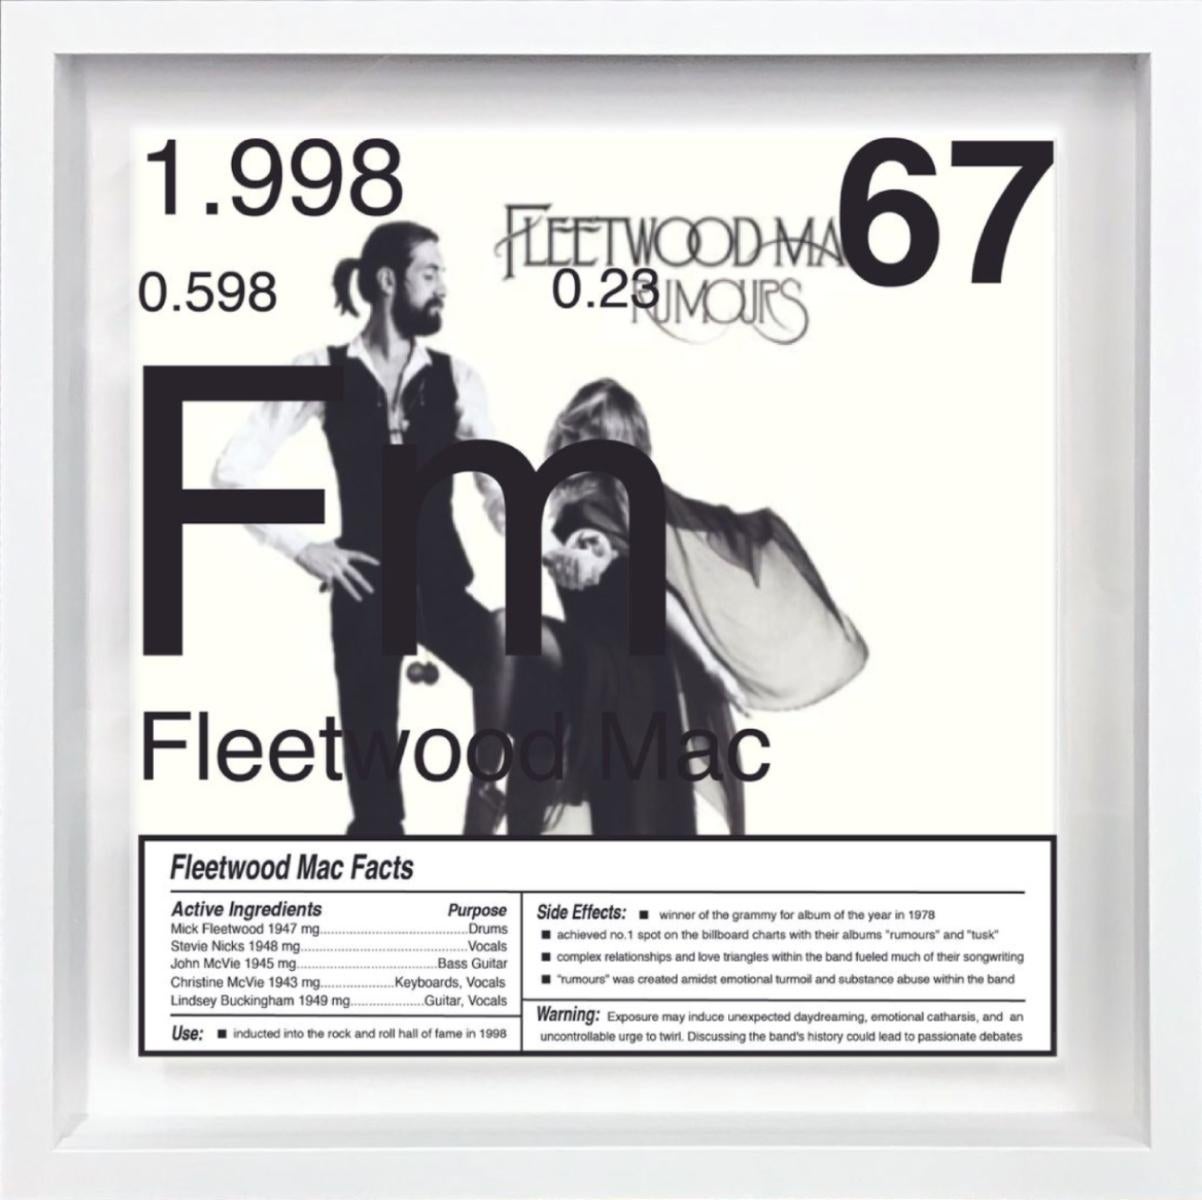 Fleetwood Mac_67 Limited edition 1/9

Daniel Allen Cohen, a Los Angeles-based artist renowned for his multidisciplinary approach, transforms popular culture into conceptual art. His creations are nuanced reflections of societal values, desires,